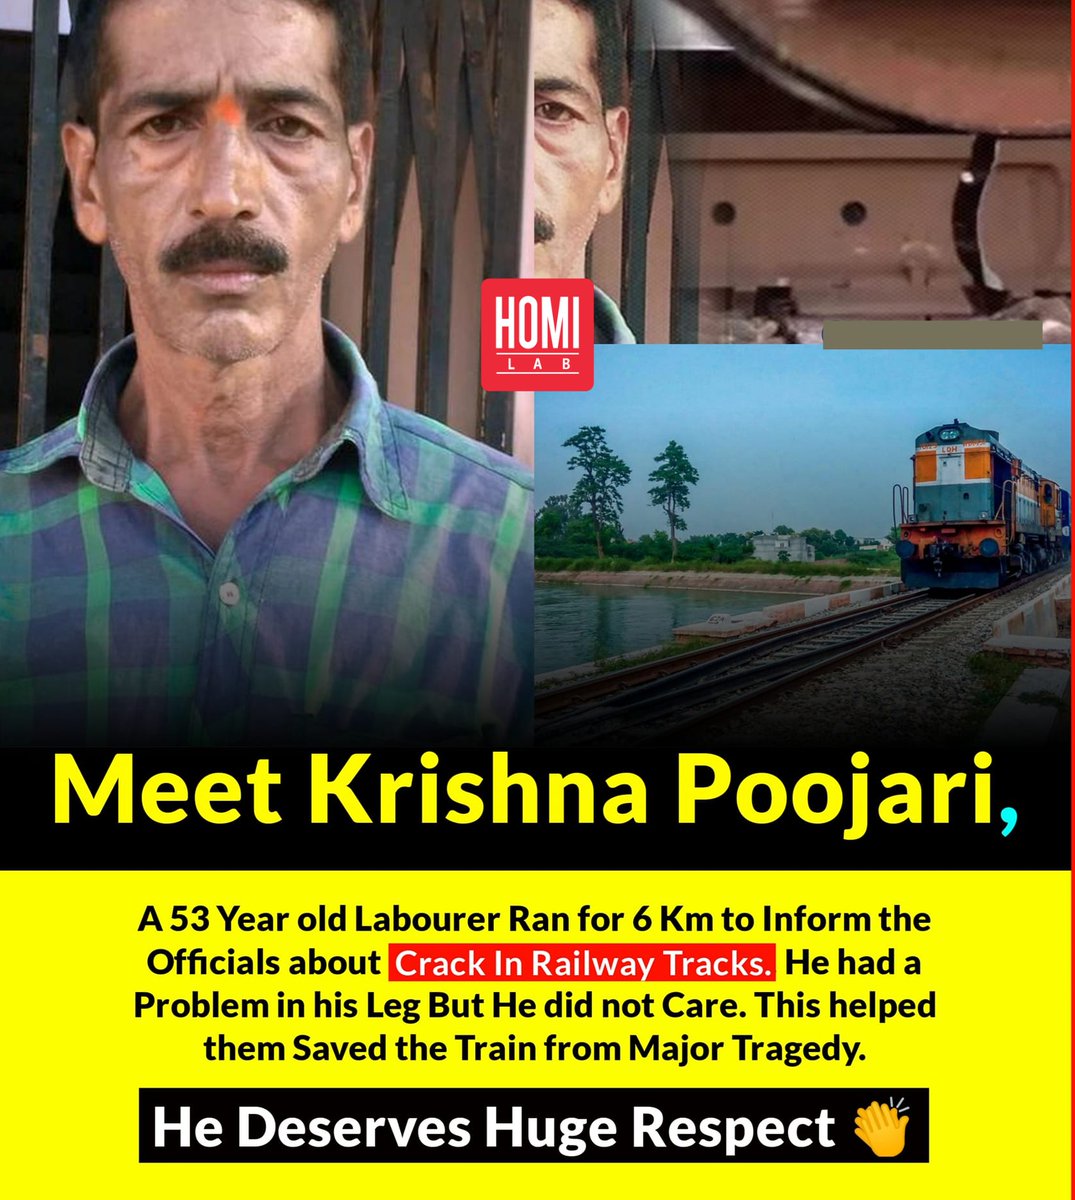 Despite nerve issue in his leg, Krishna Poojary's extraordinary courage saved countless lives! 🙌 He ran an incredible 6km to urgently inform railway officials about a dangerous crack that could have led to a devastating train accident. 💥 We salute his selflessness! #TrueHero